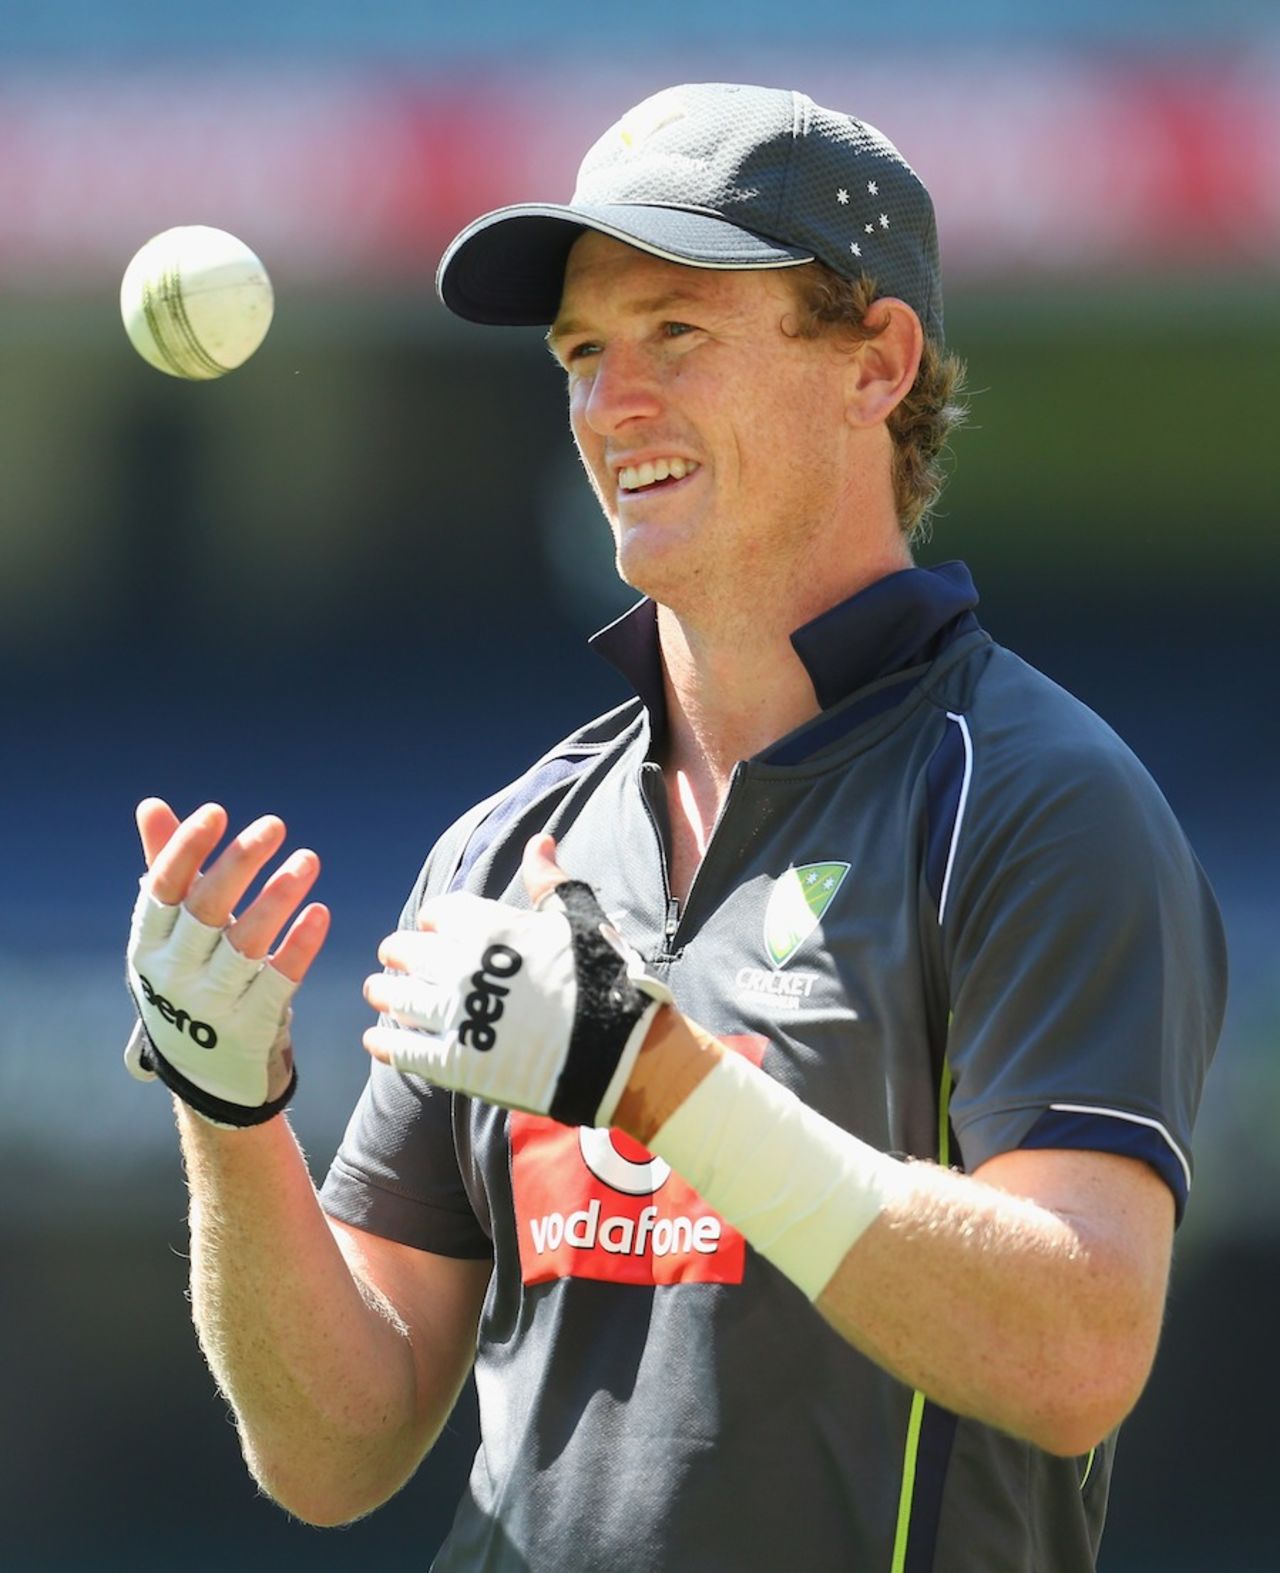 George Bailey at a training session on the eve of the first ODI against Sri Lanka, Melbourne, January 10, 2013